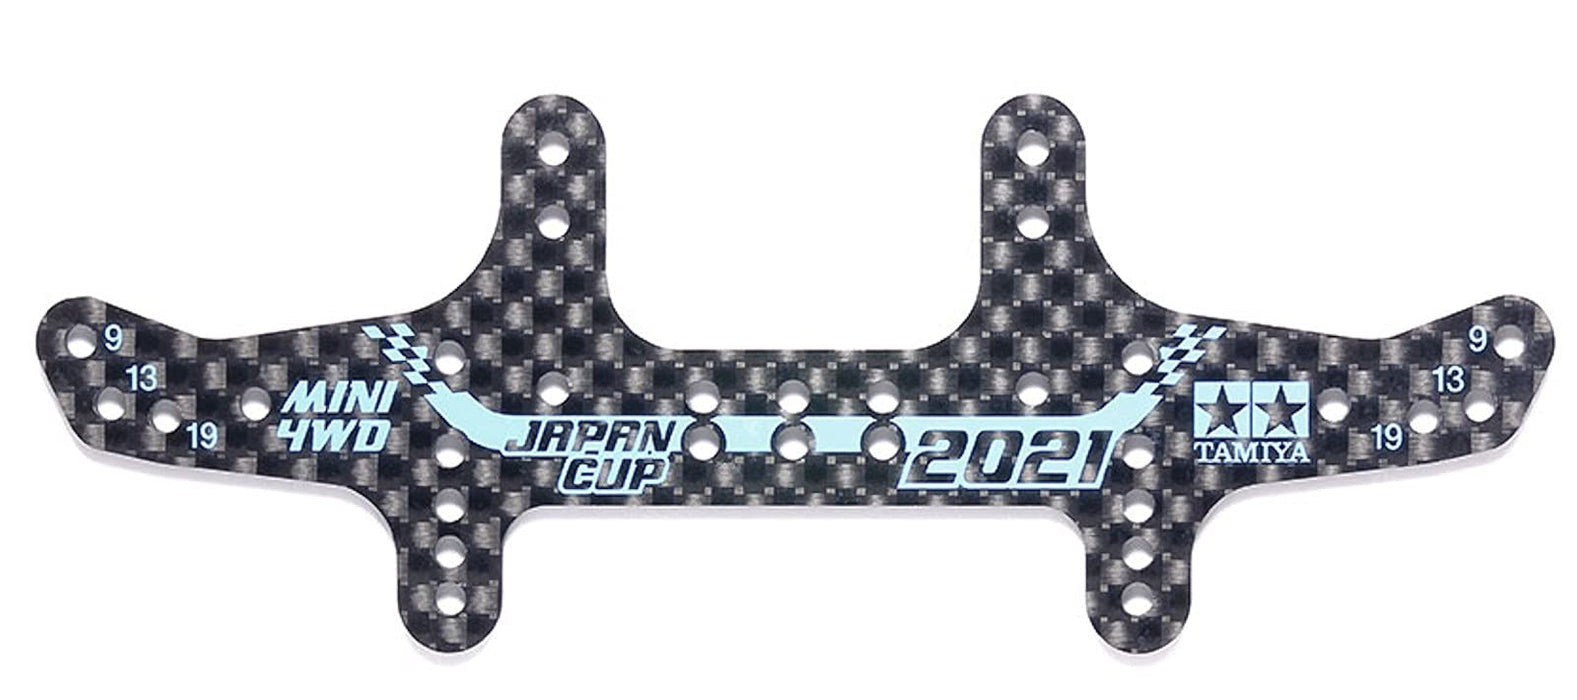 TAMIYA Mini 4Wd Hg Carbone Arrière Multi Roller Setting Stay 1.5Mm J-Cup 2021